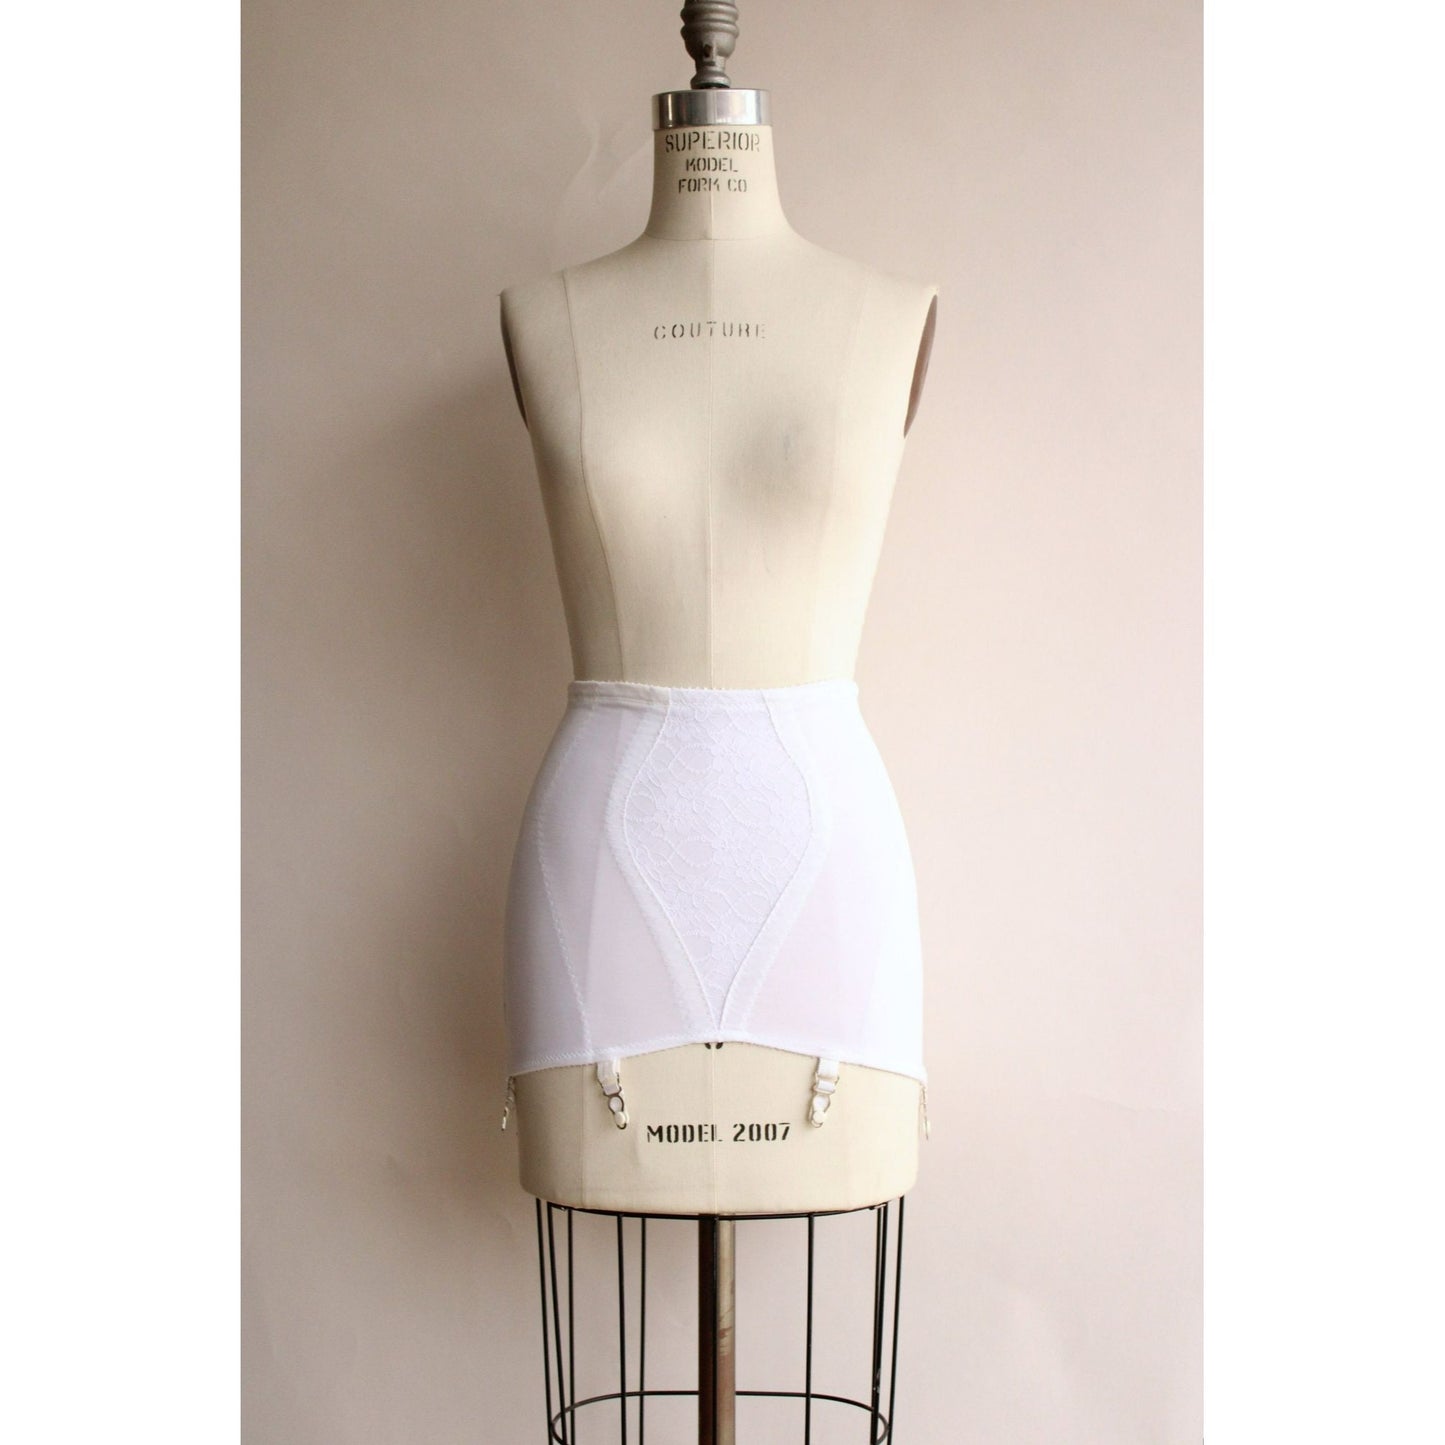 Vintage 1990s Vicky Form Control Top Girdle